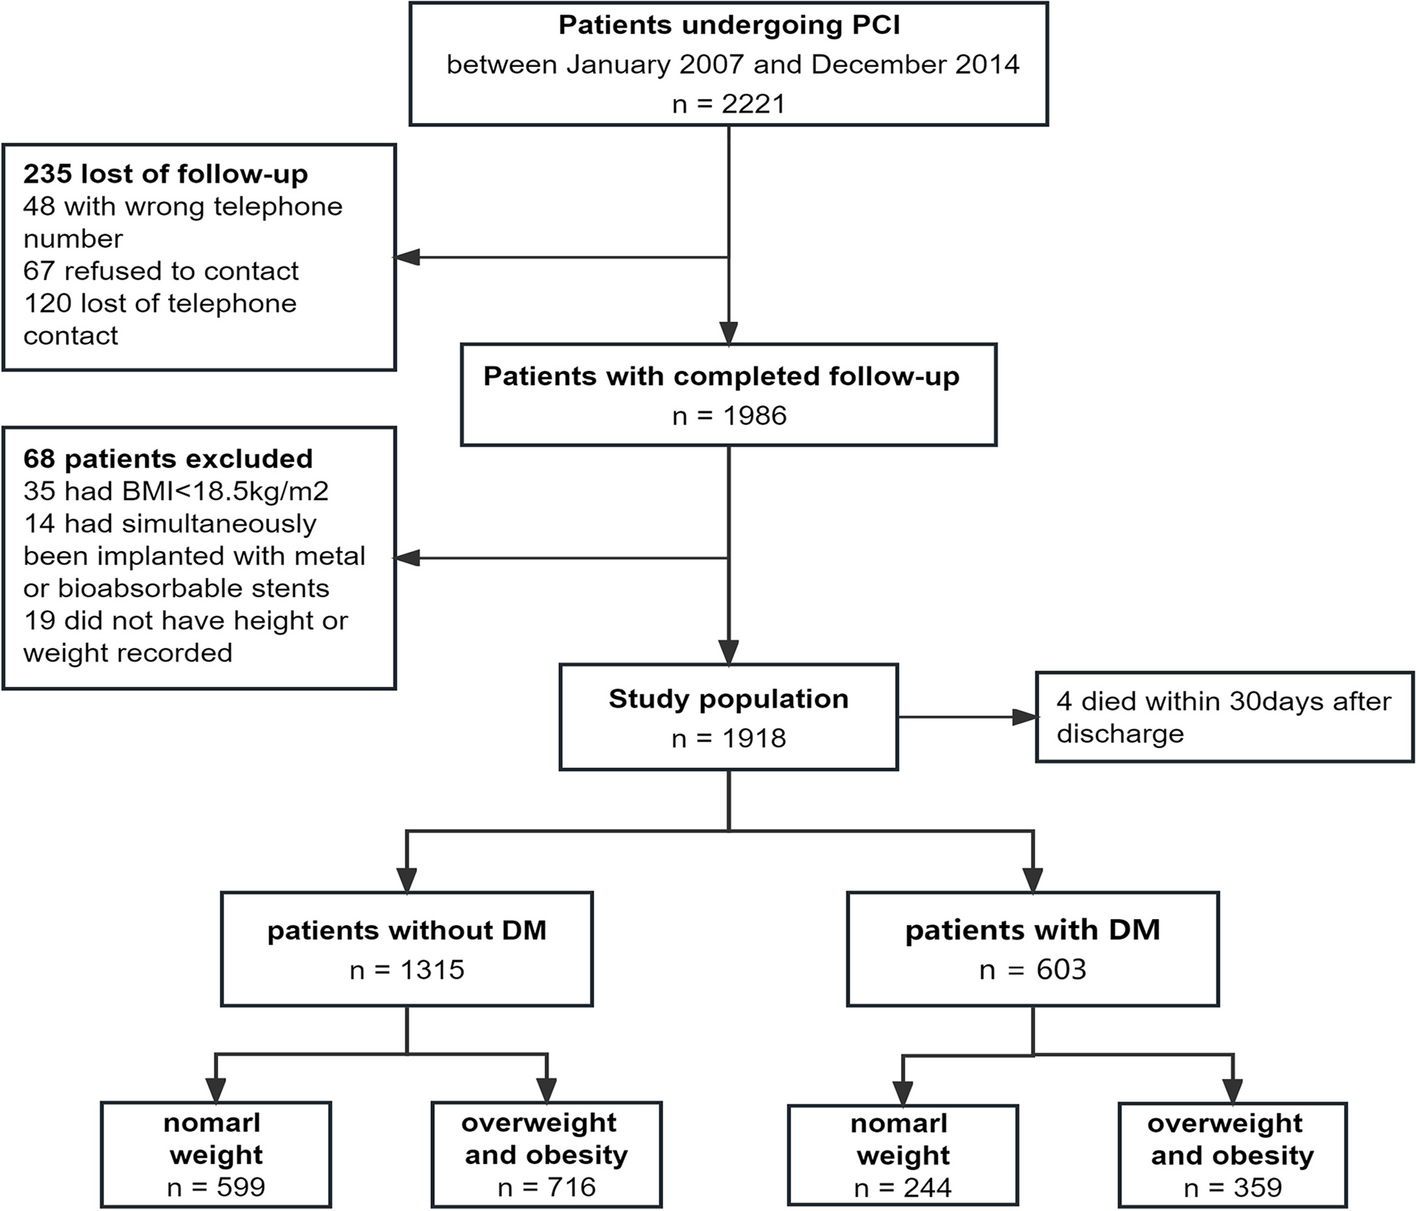 Impact of body mass index on long-term outcomes in patients undergoing percutaneous coronary intervention stratified by diabetes mellitus: a retrospective cohort study